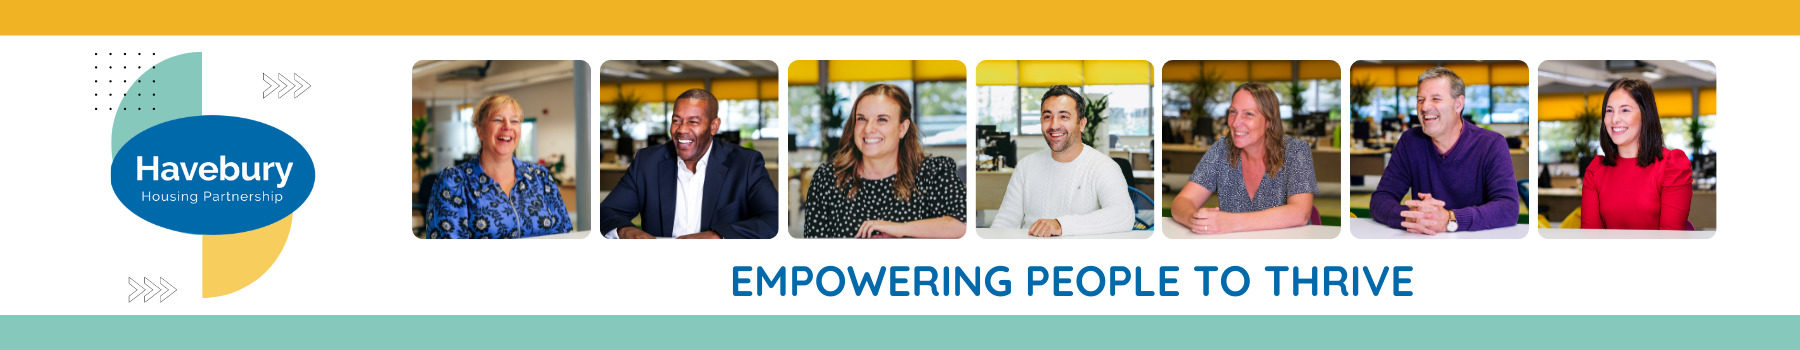 Empowering People to Thrive